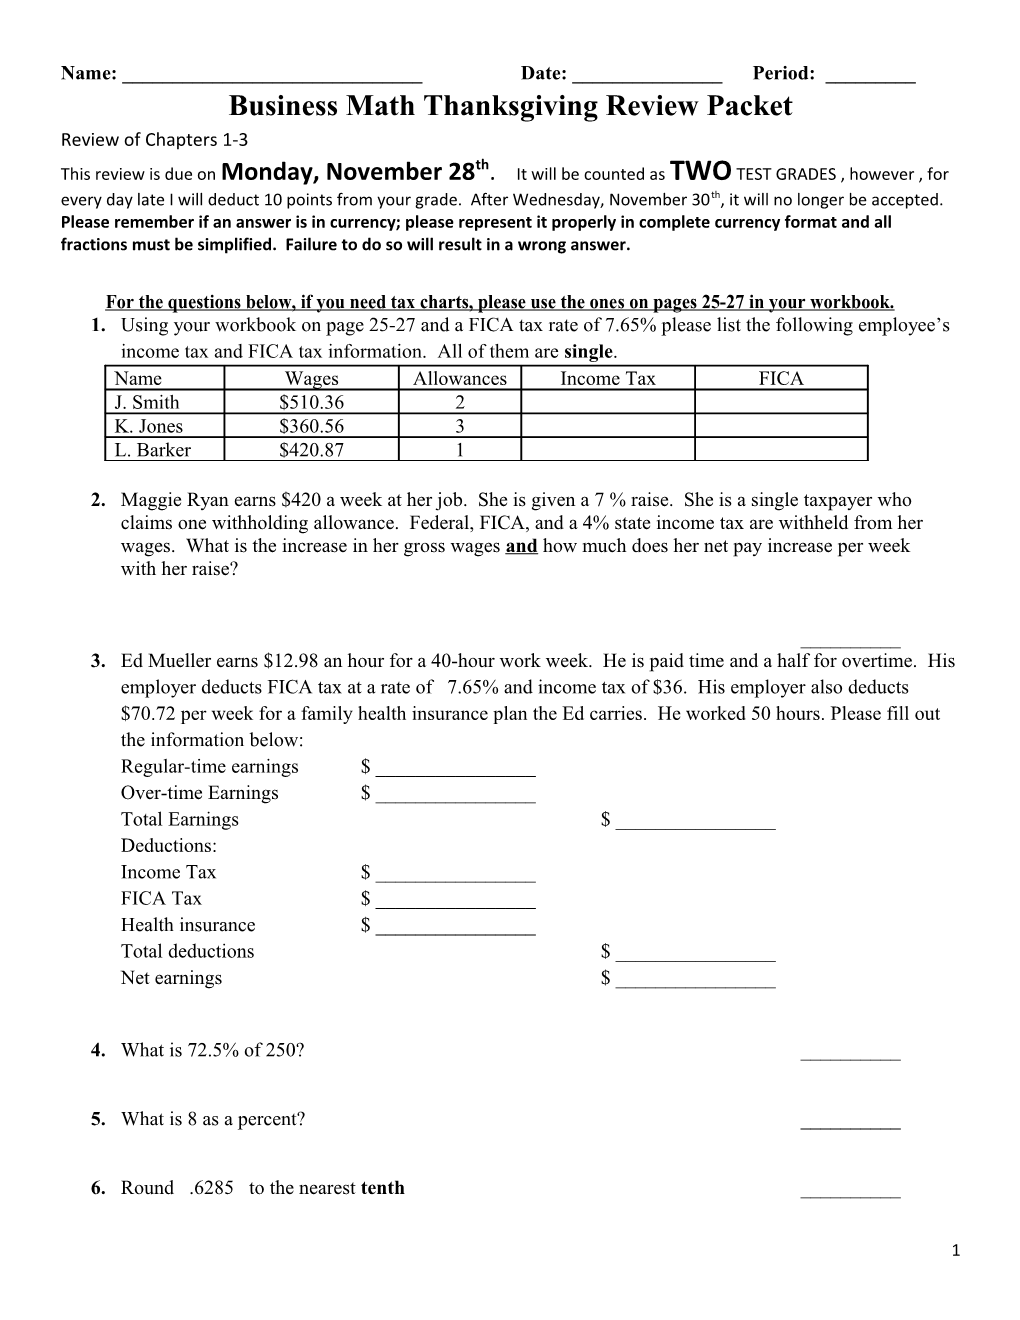 Business Math Thanksgiving Review Packet